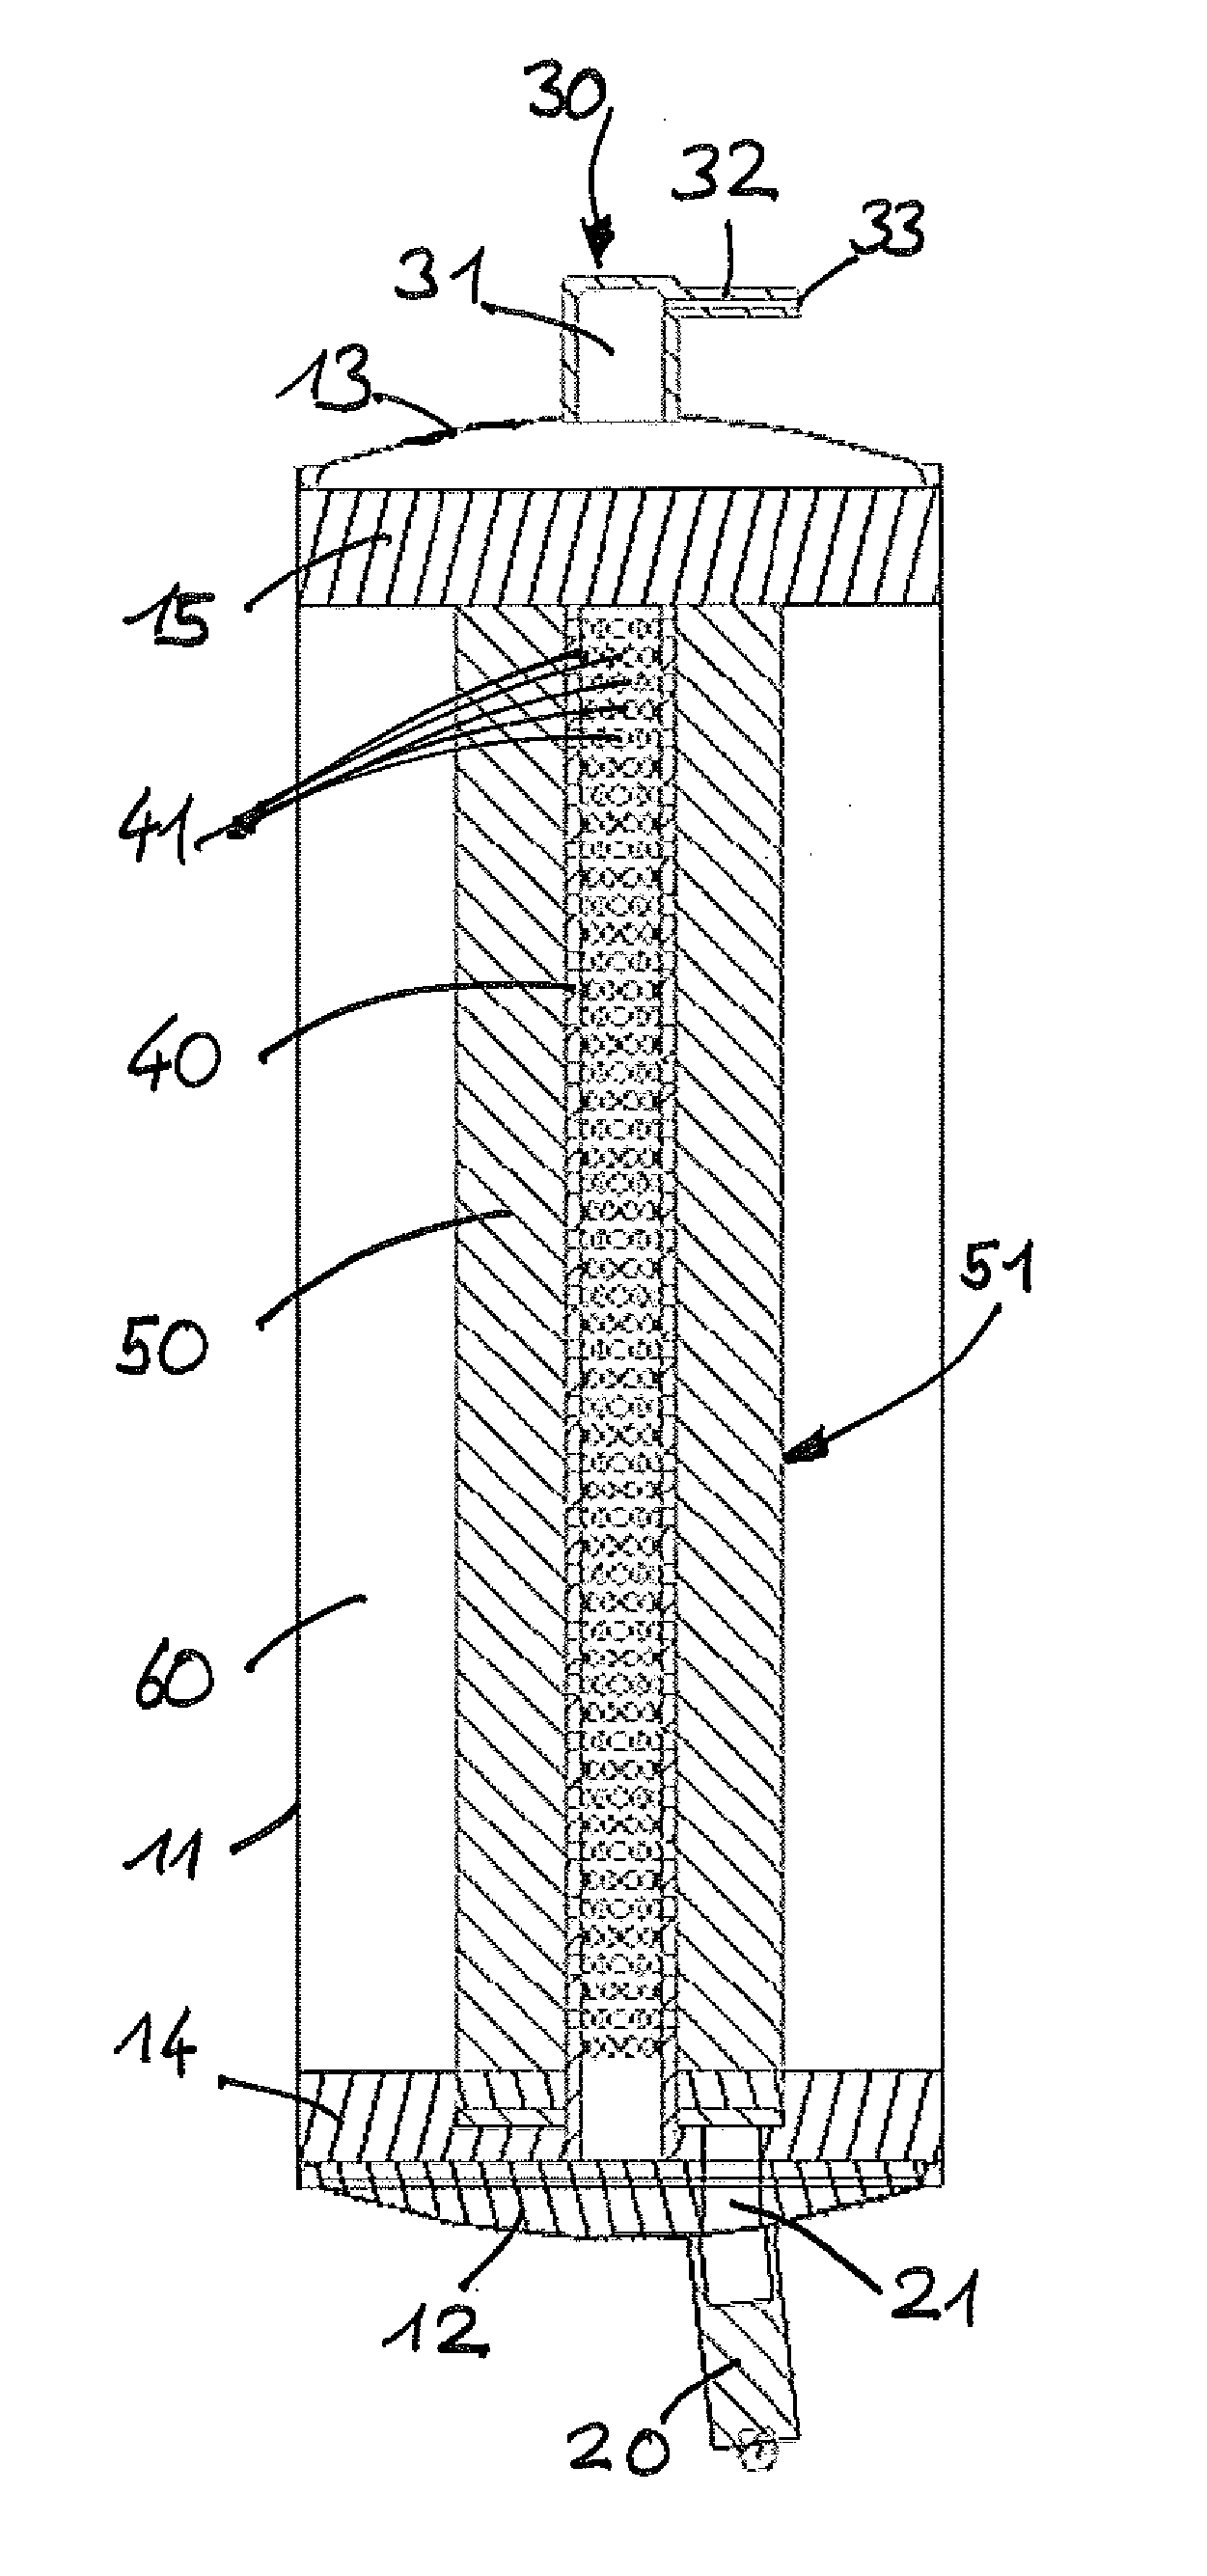 Chemical oxygen generator with core channel tube for an emergency oxygen device